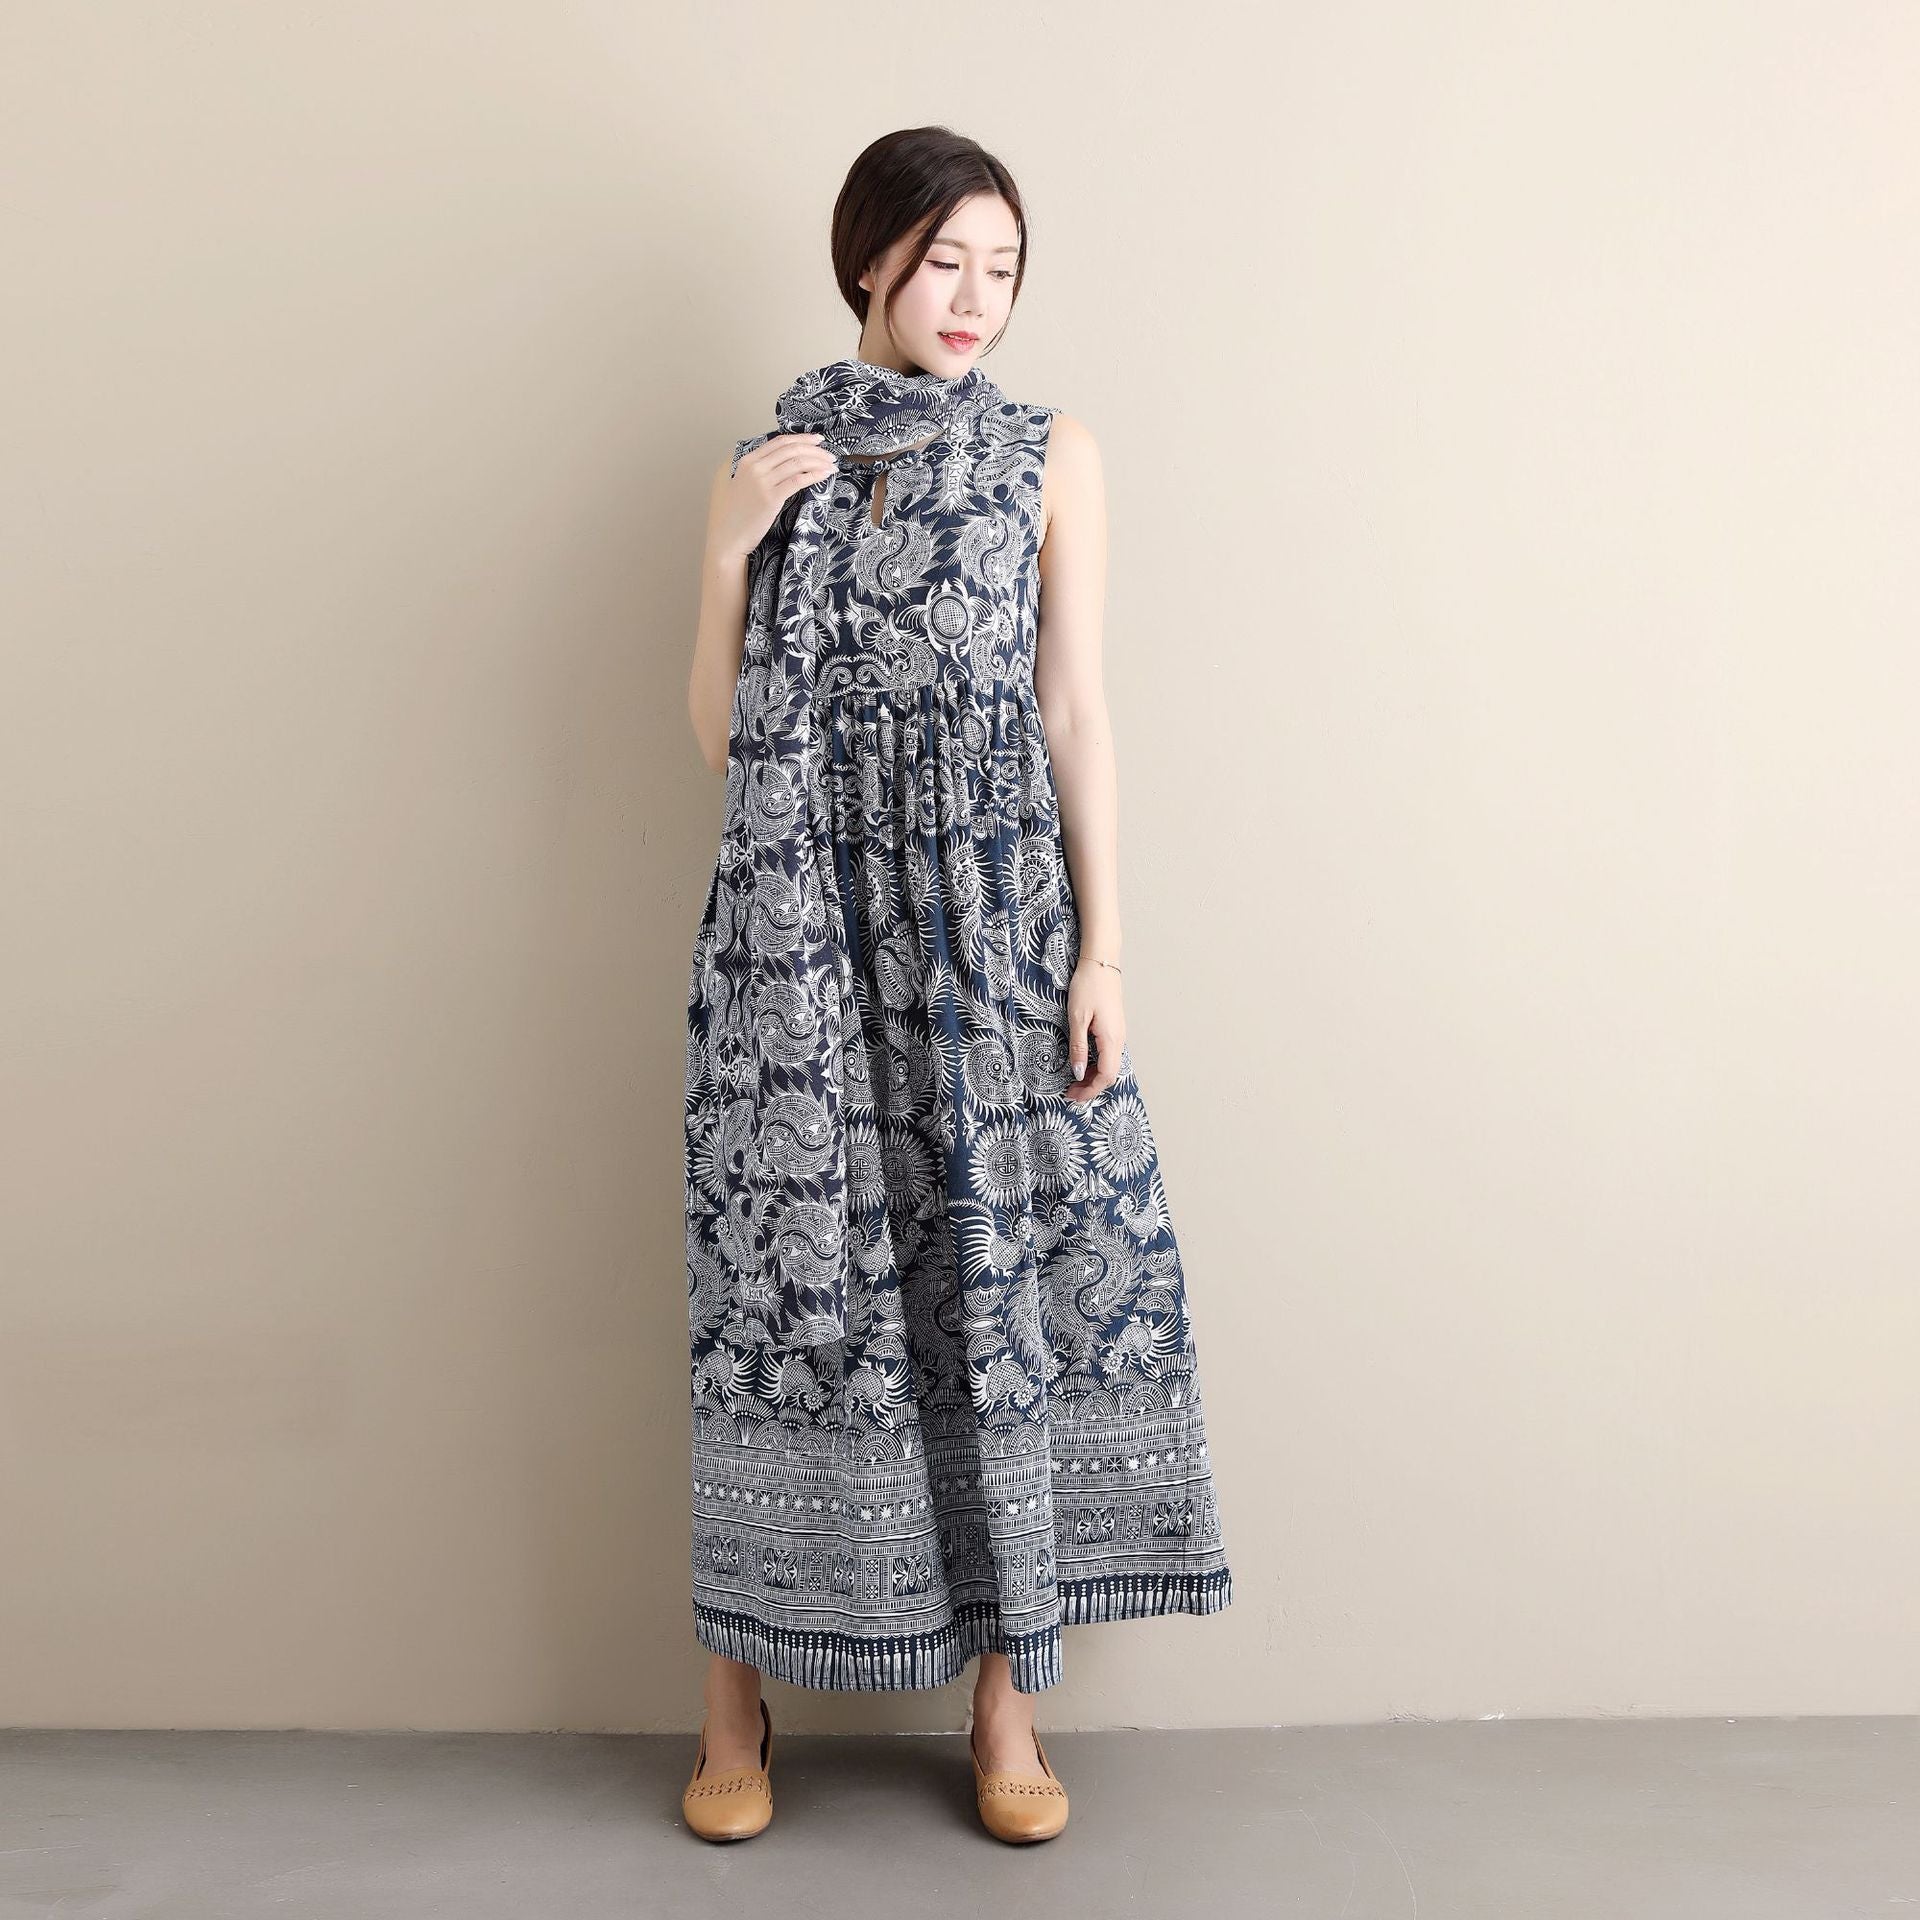 Linen Cotton Women Dress with Scarf in Retro Print 250521p